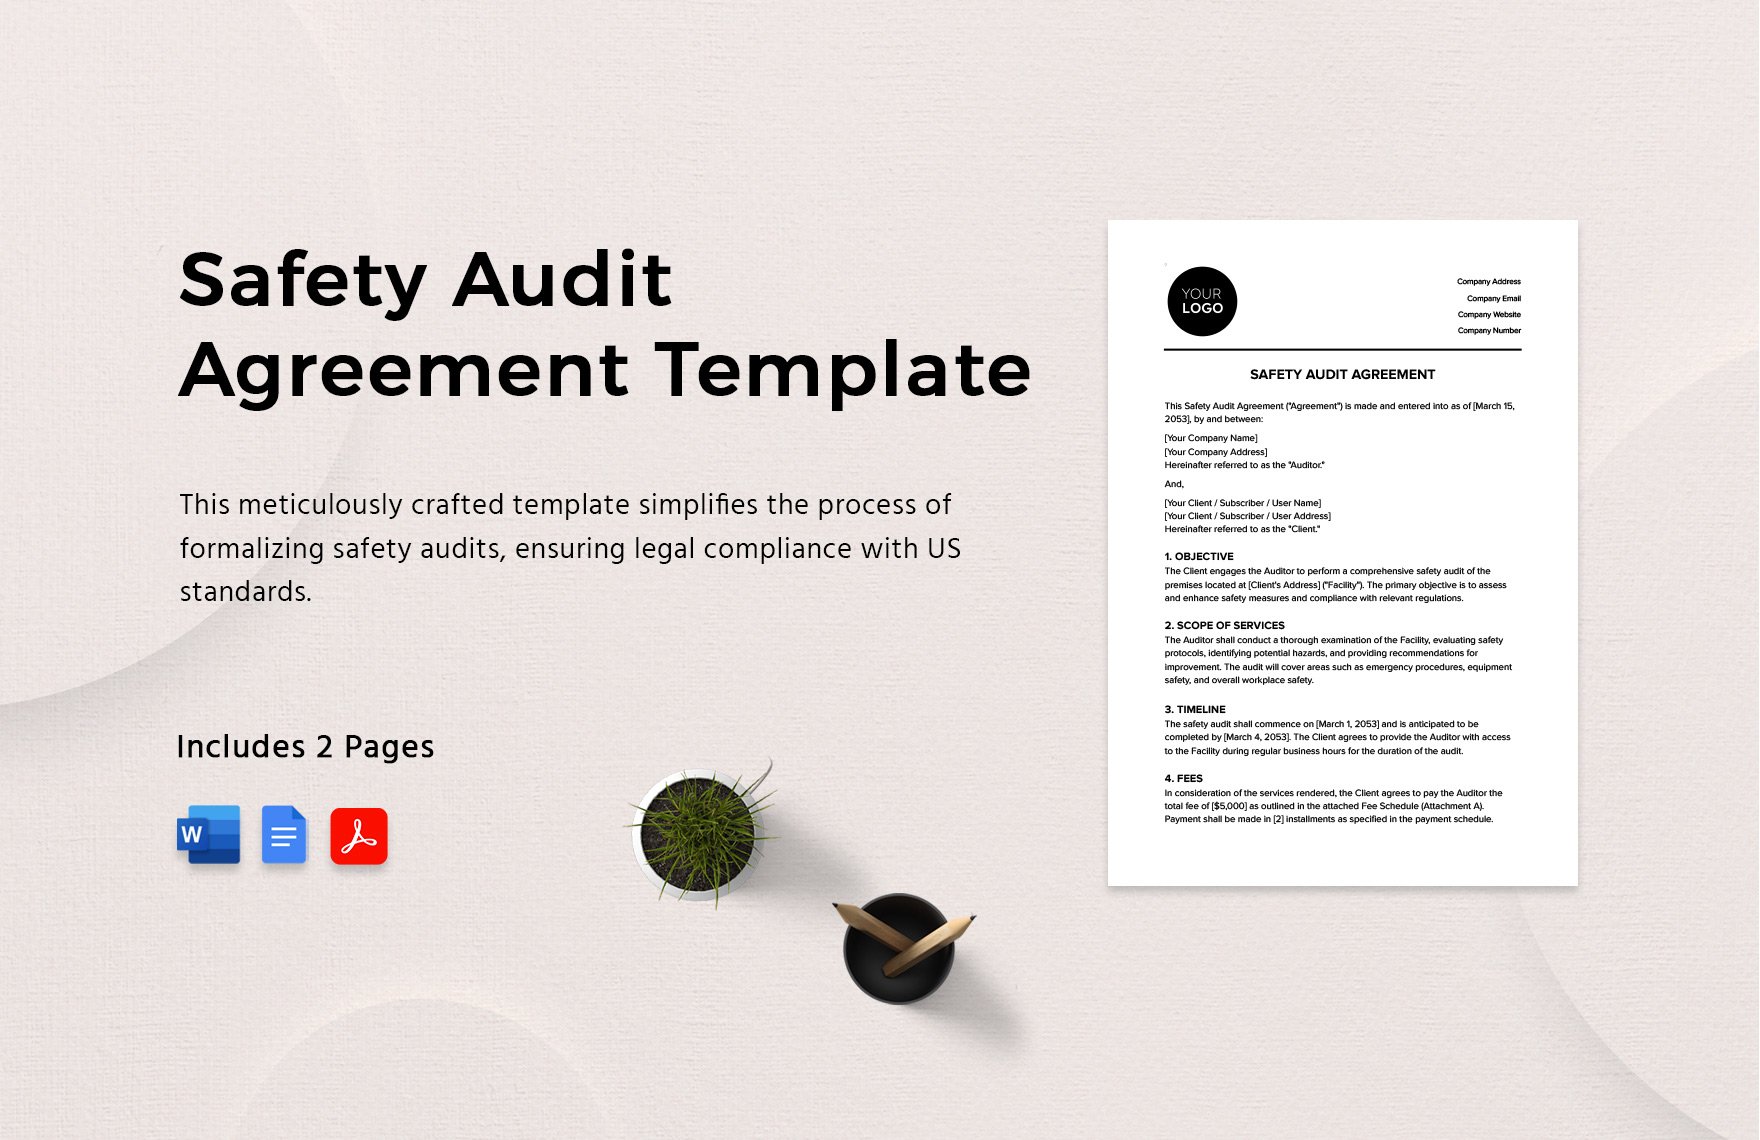 Safety Audit Agreement Template